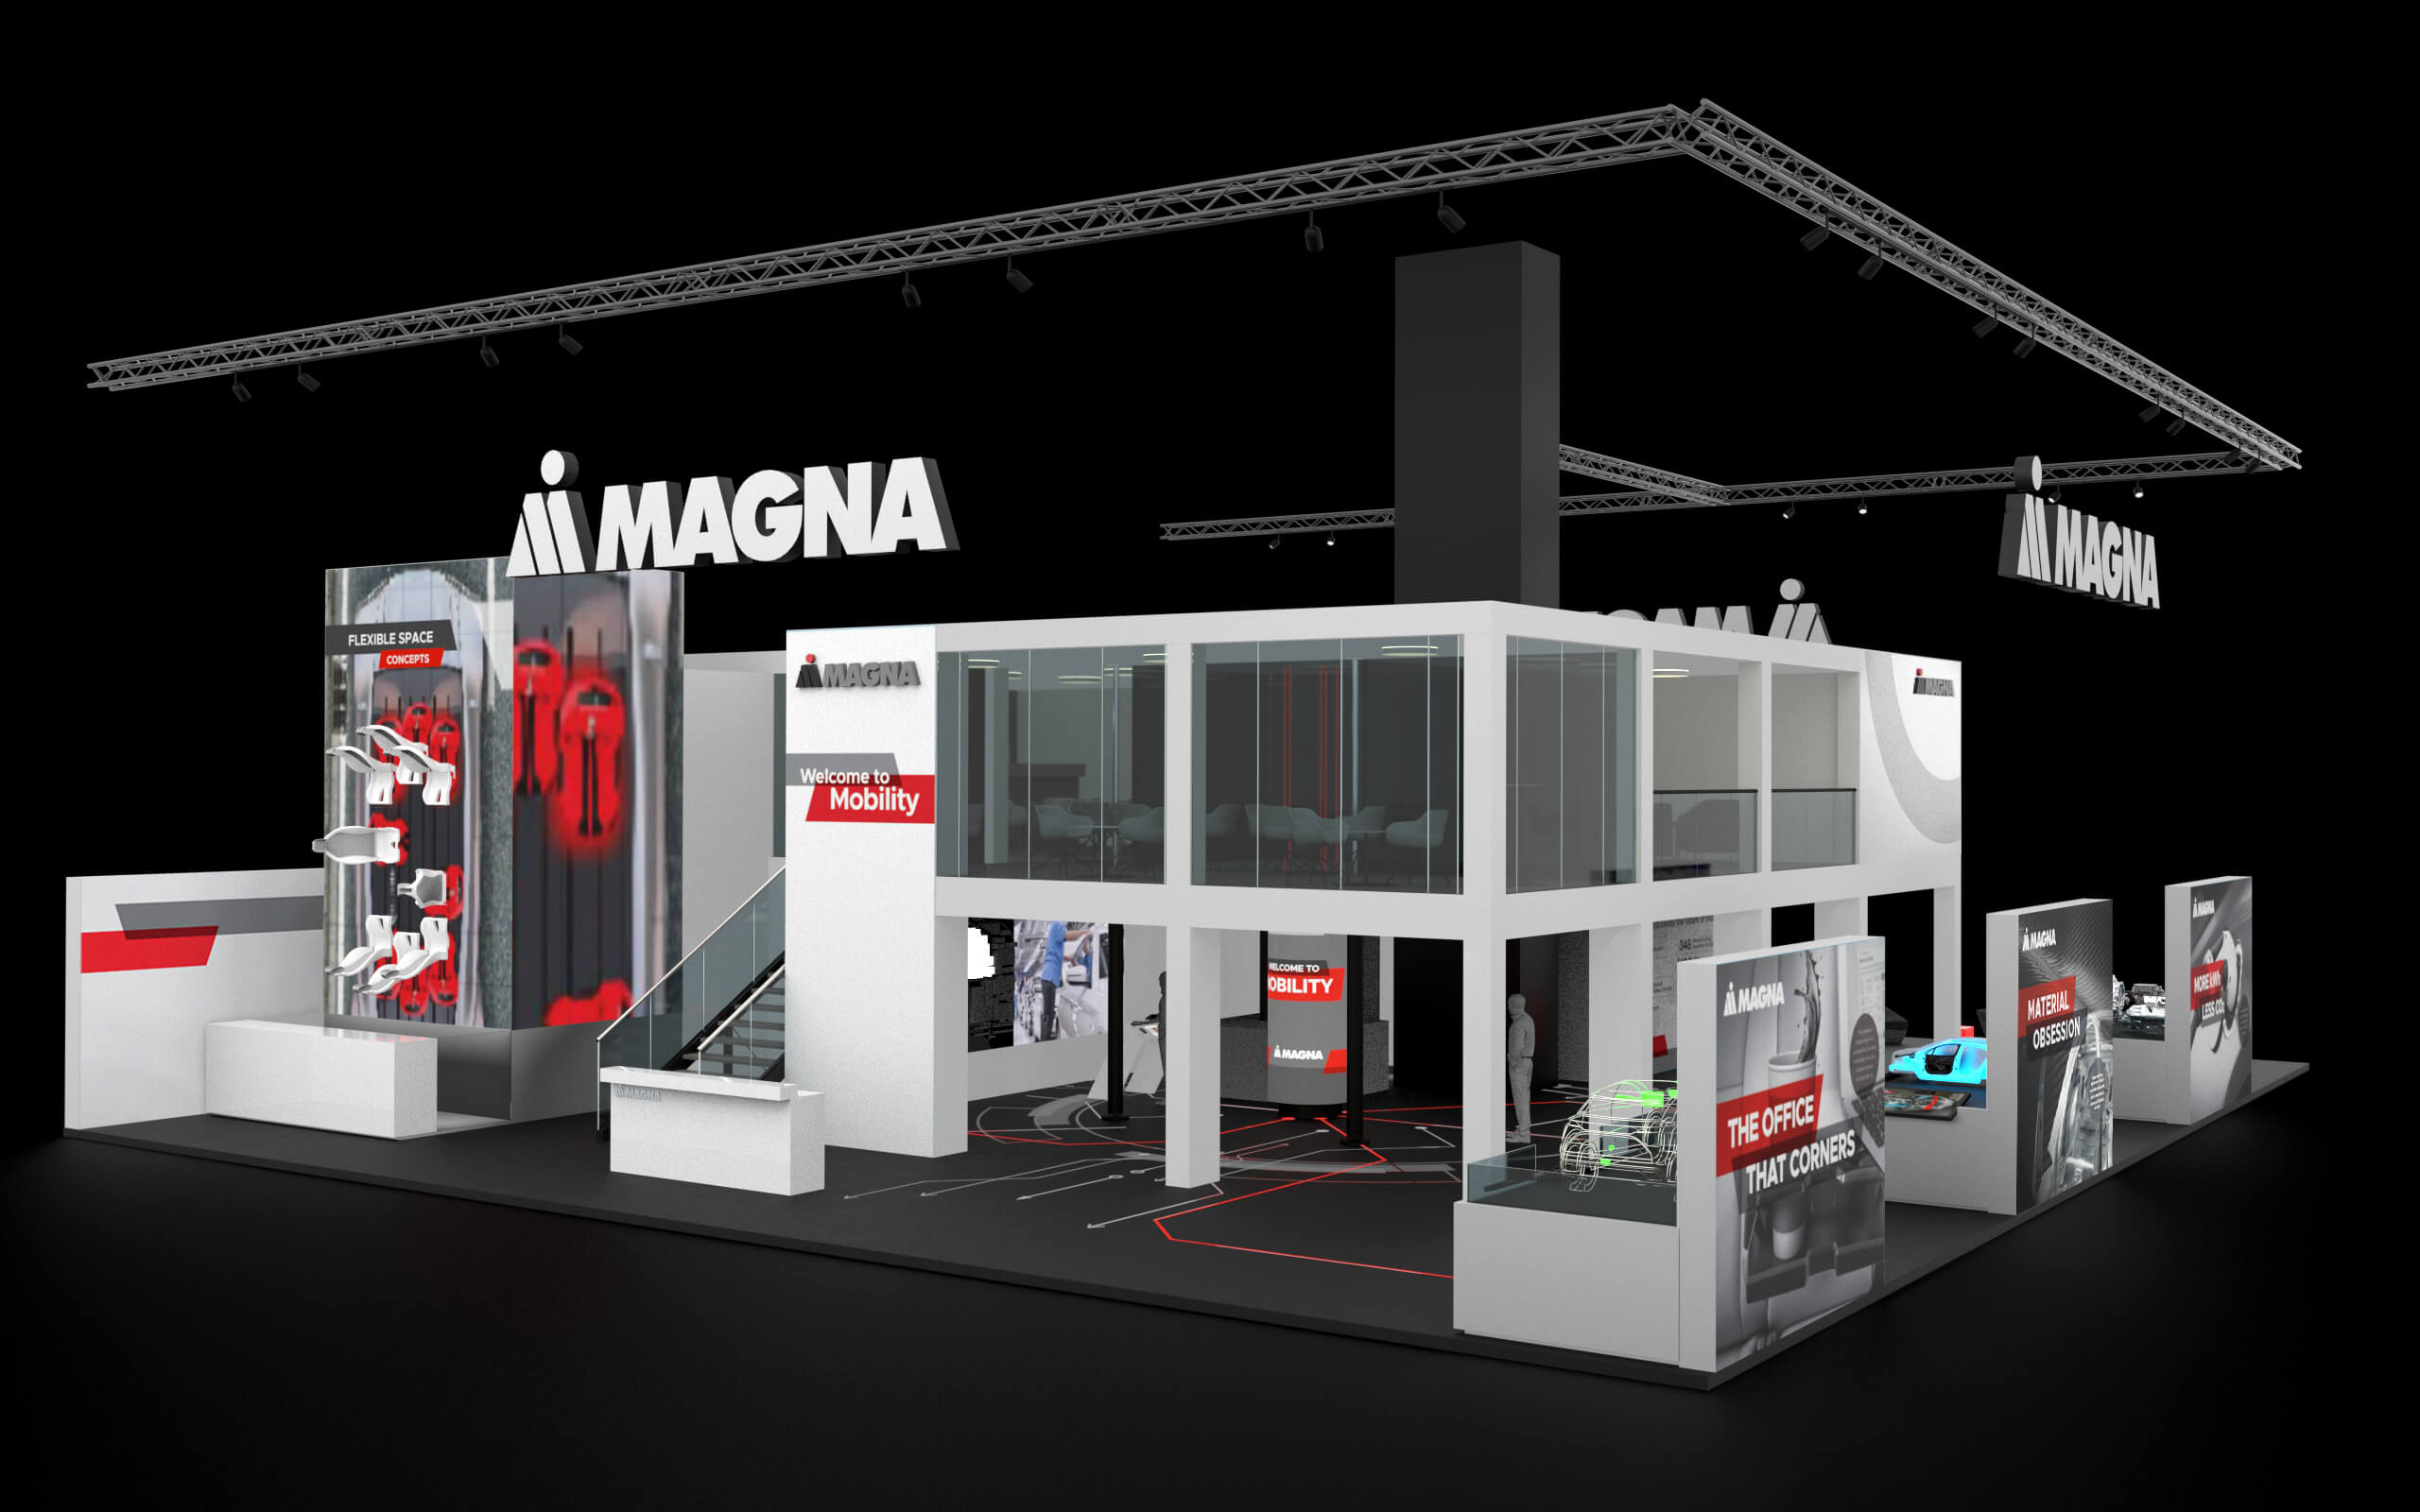 Magna’s presence at IAA 2019: Welcome to Mobility